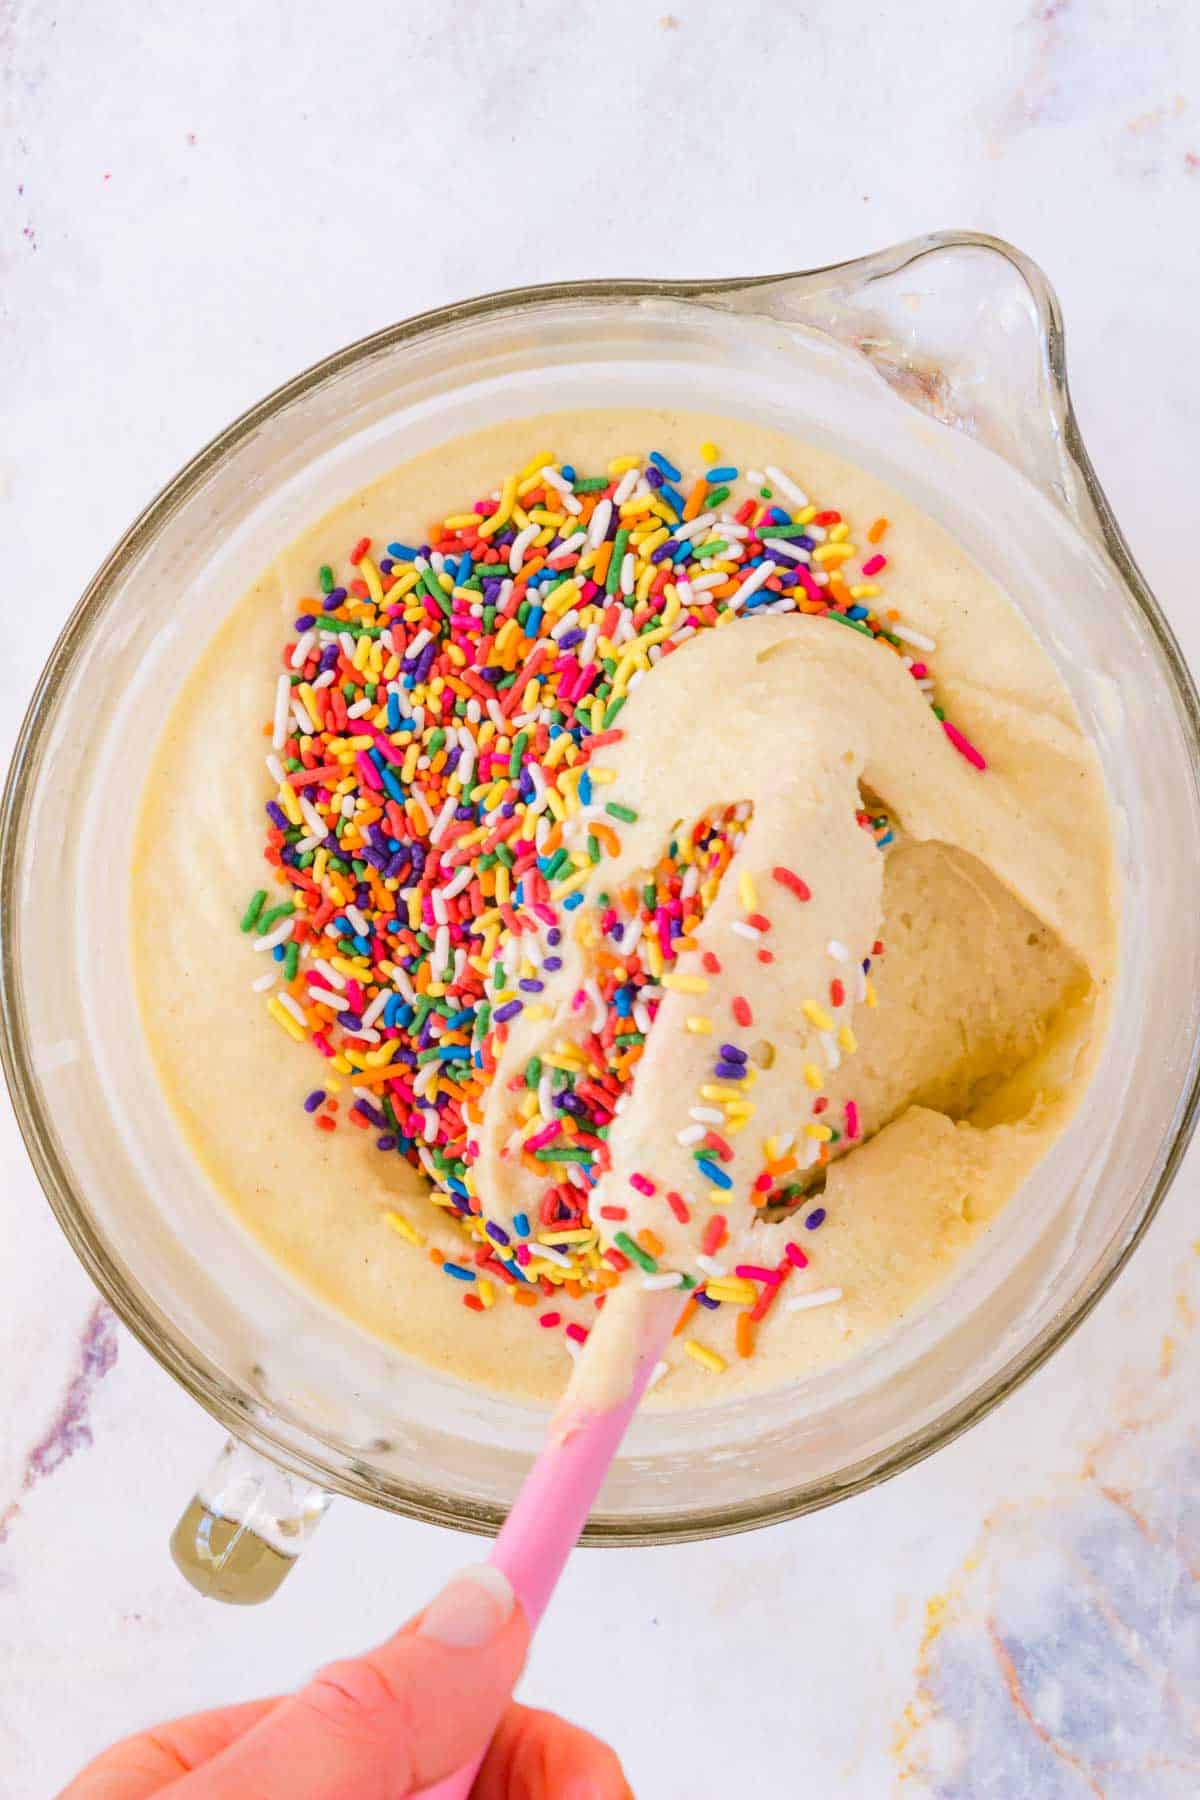 Rainbow sprinkles are folded into the gluten-free cake batter.